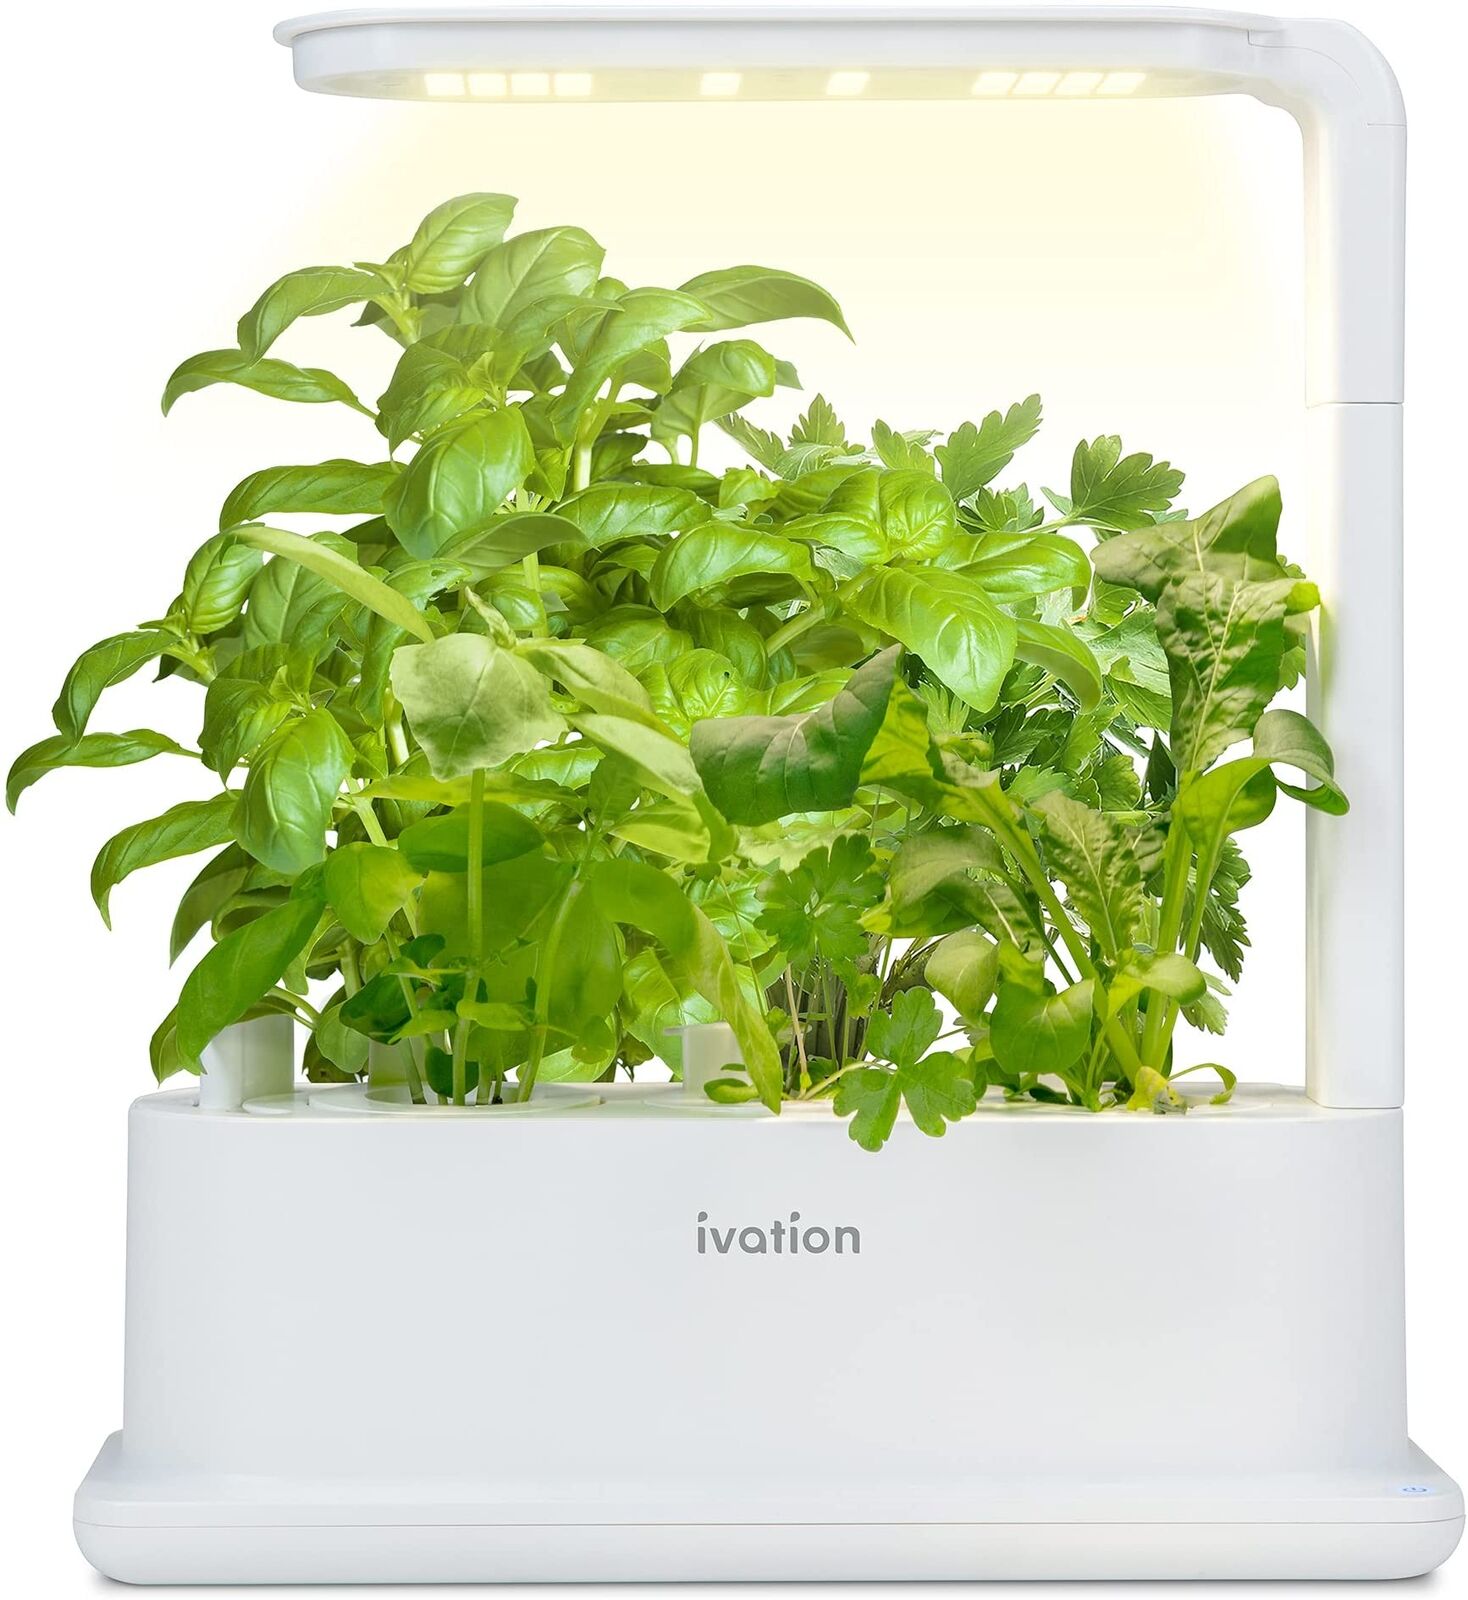 Ivation 3-Pod Indoor Hydroponics Growing System Kit w/ LED Grow Light